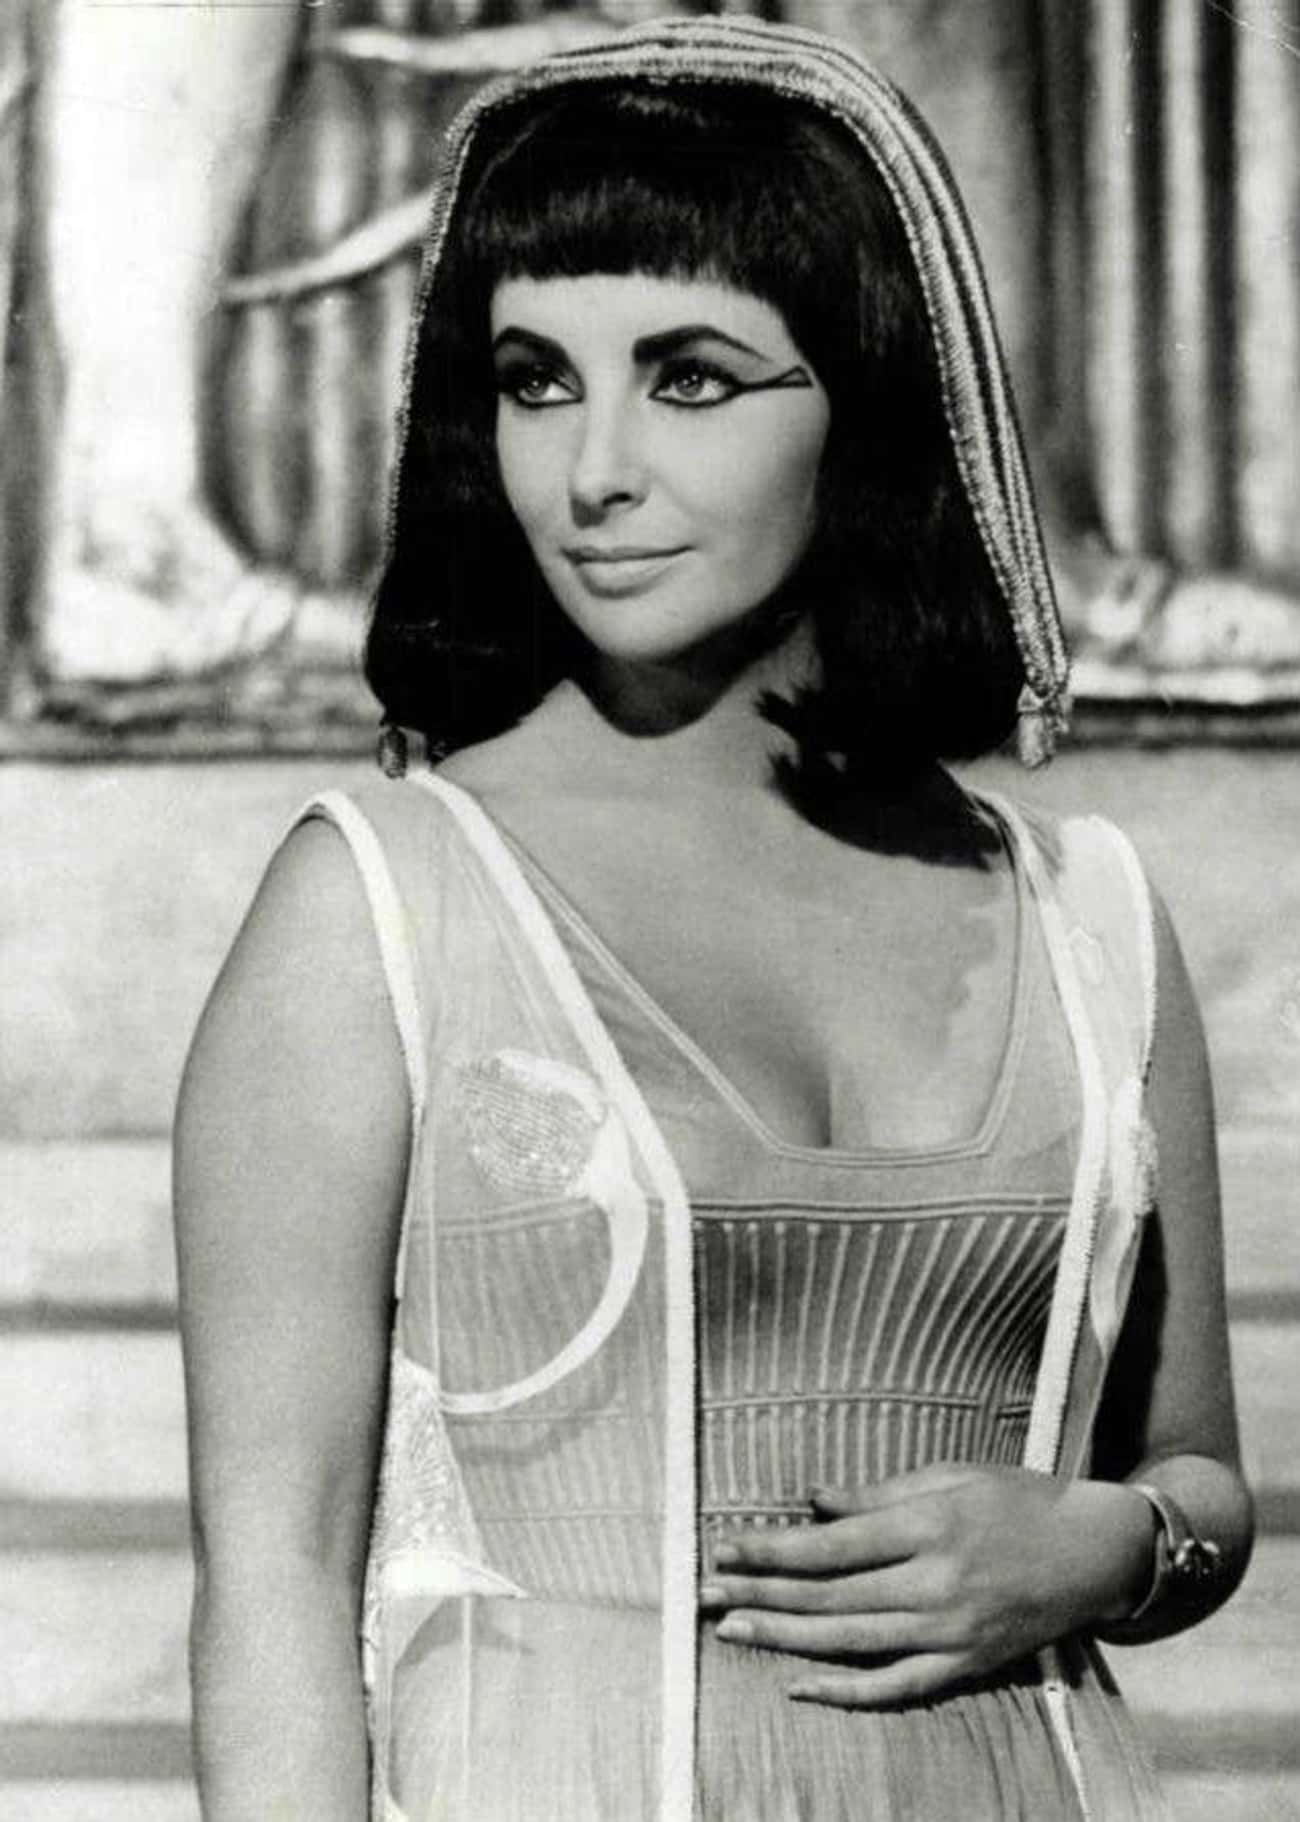 Cleopatra Was Probably No Elizabeth Taylor in the Looks Department